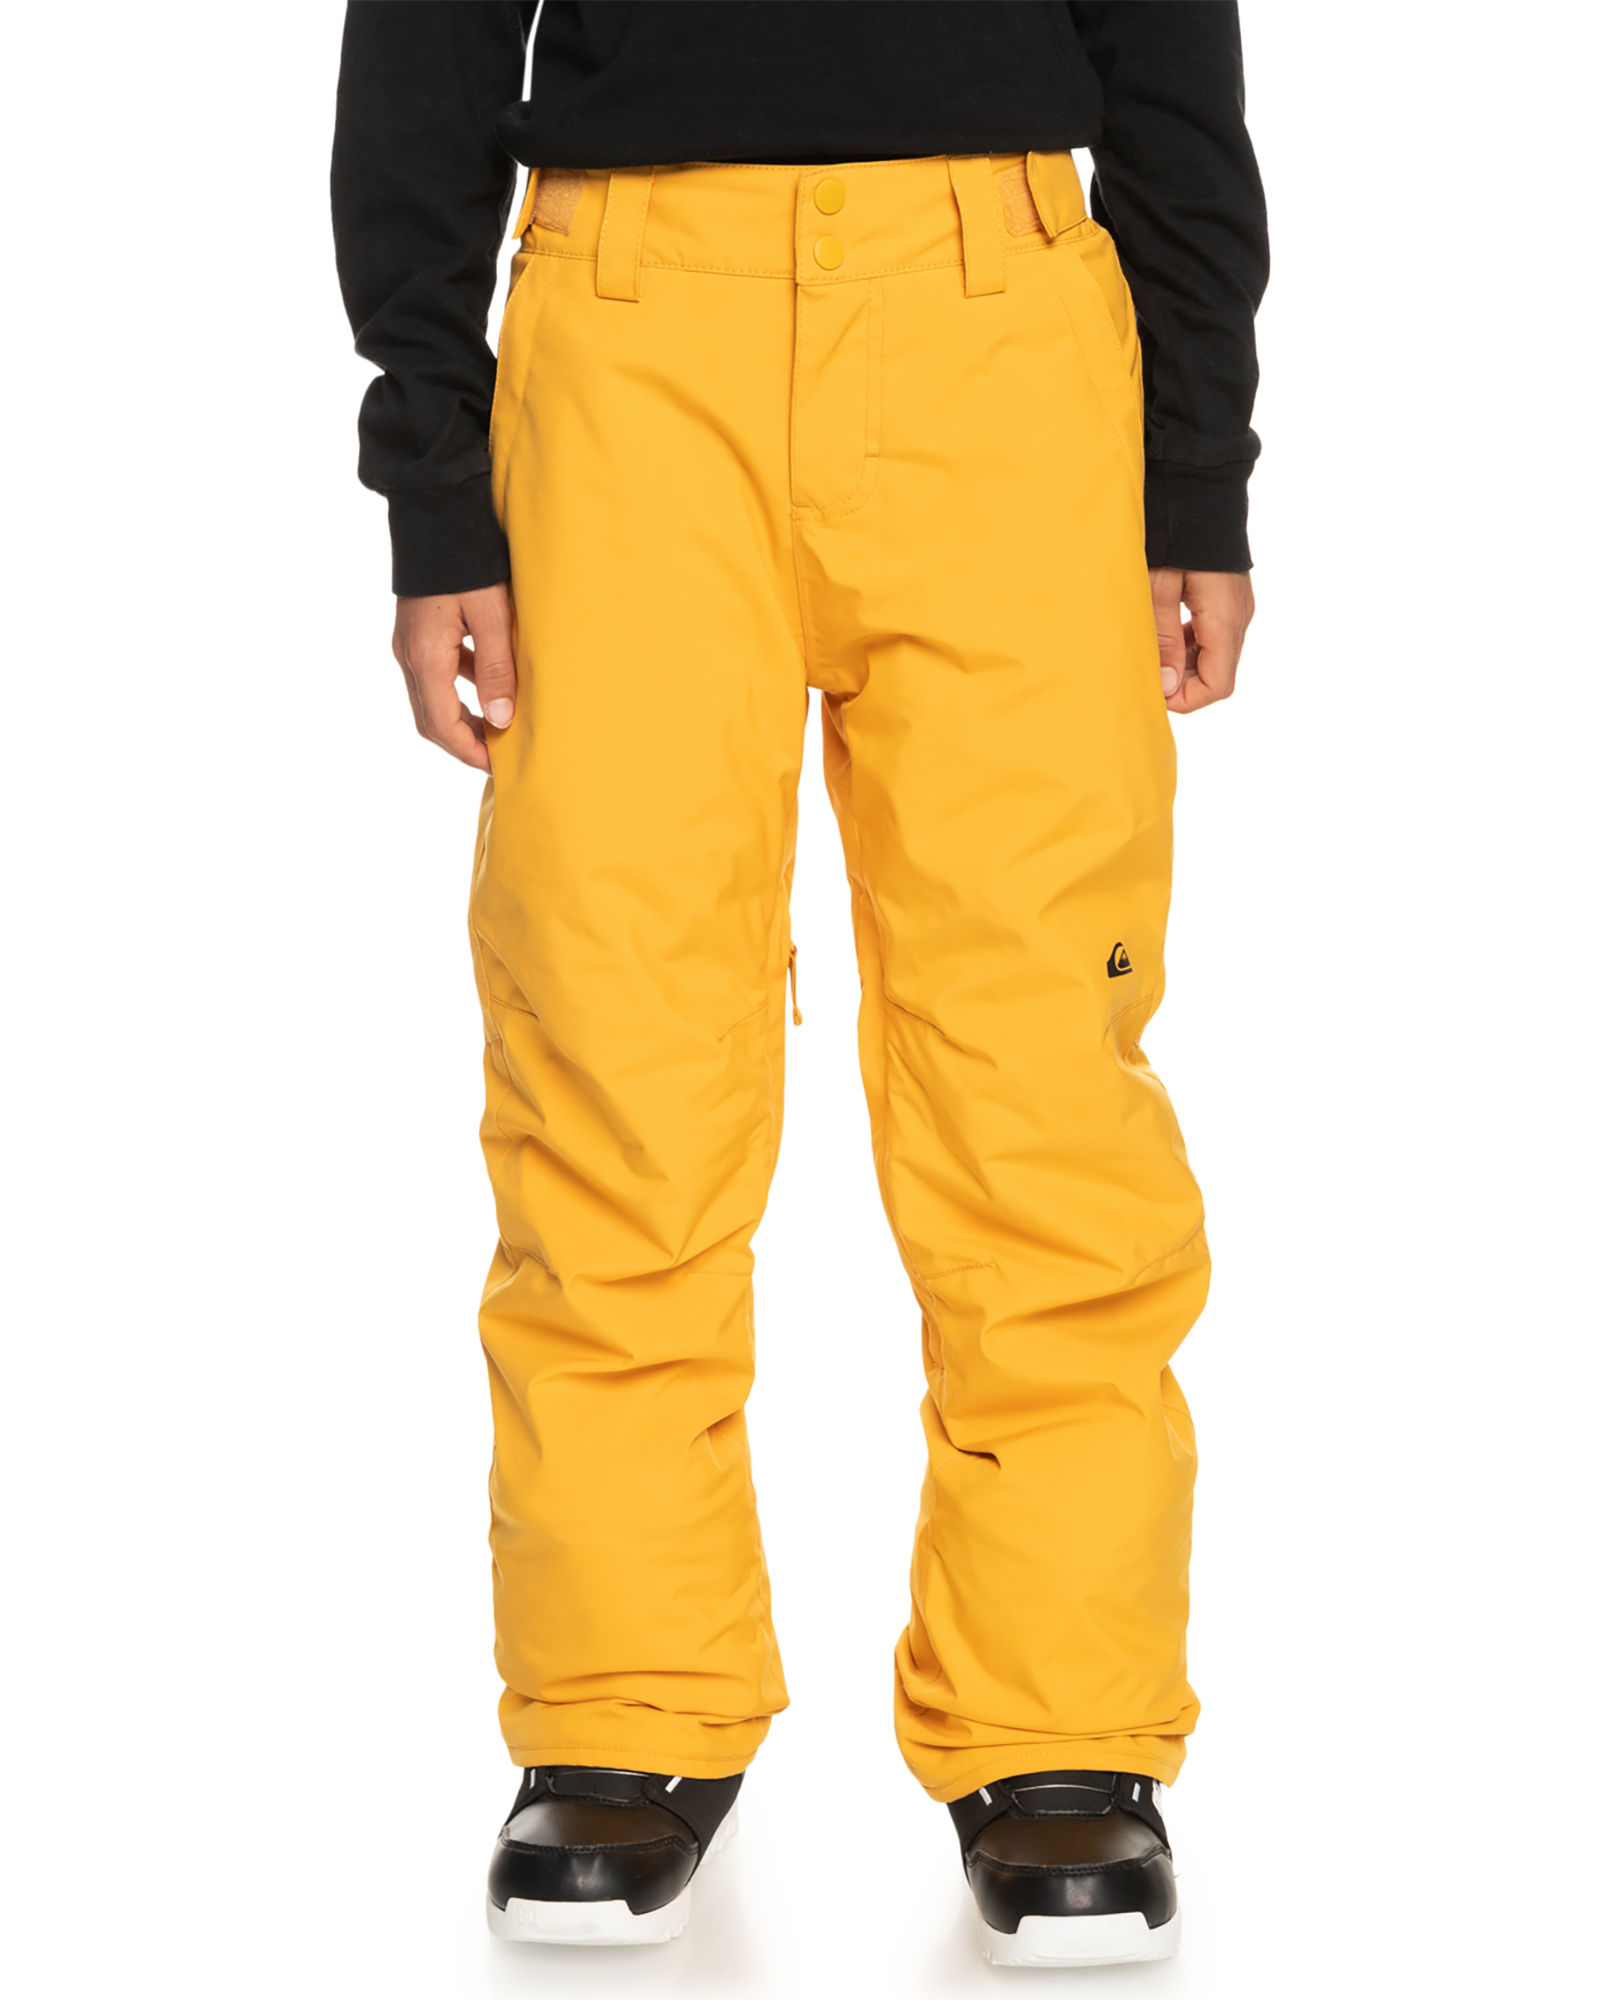 Quiksilver Estate Boys’ Pants K14+ - Mineral Yellow 16 Years